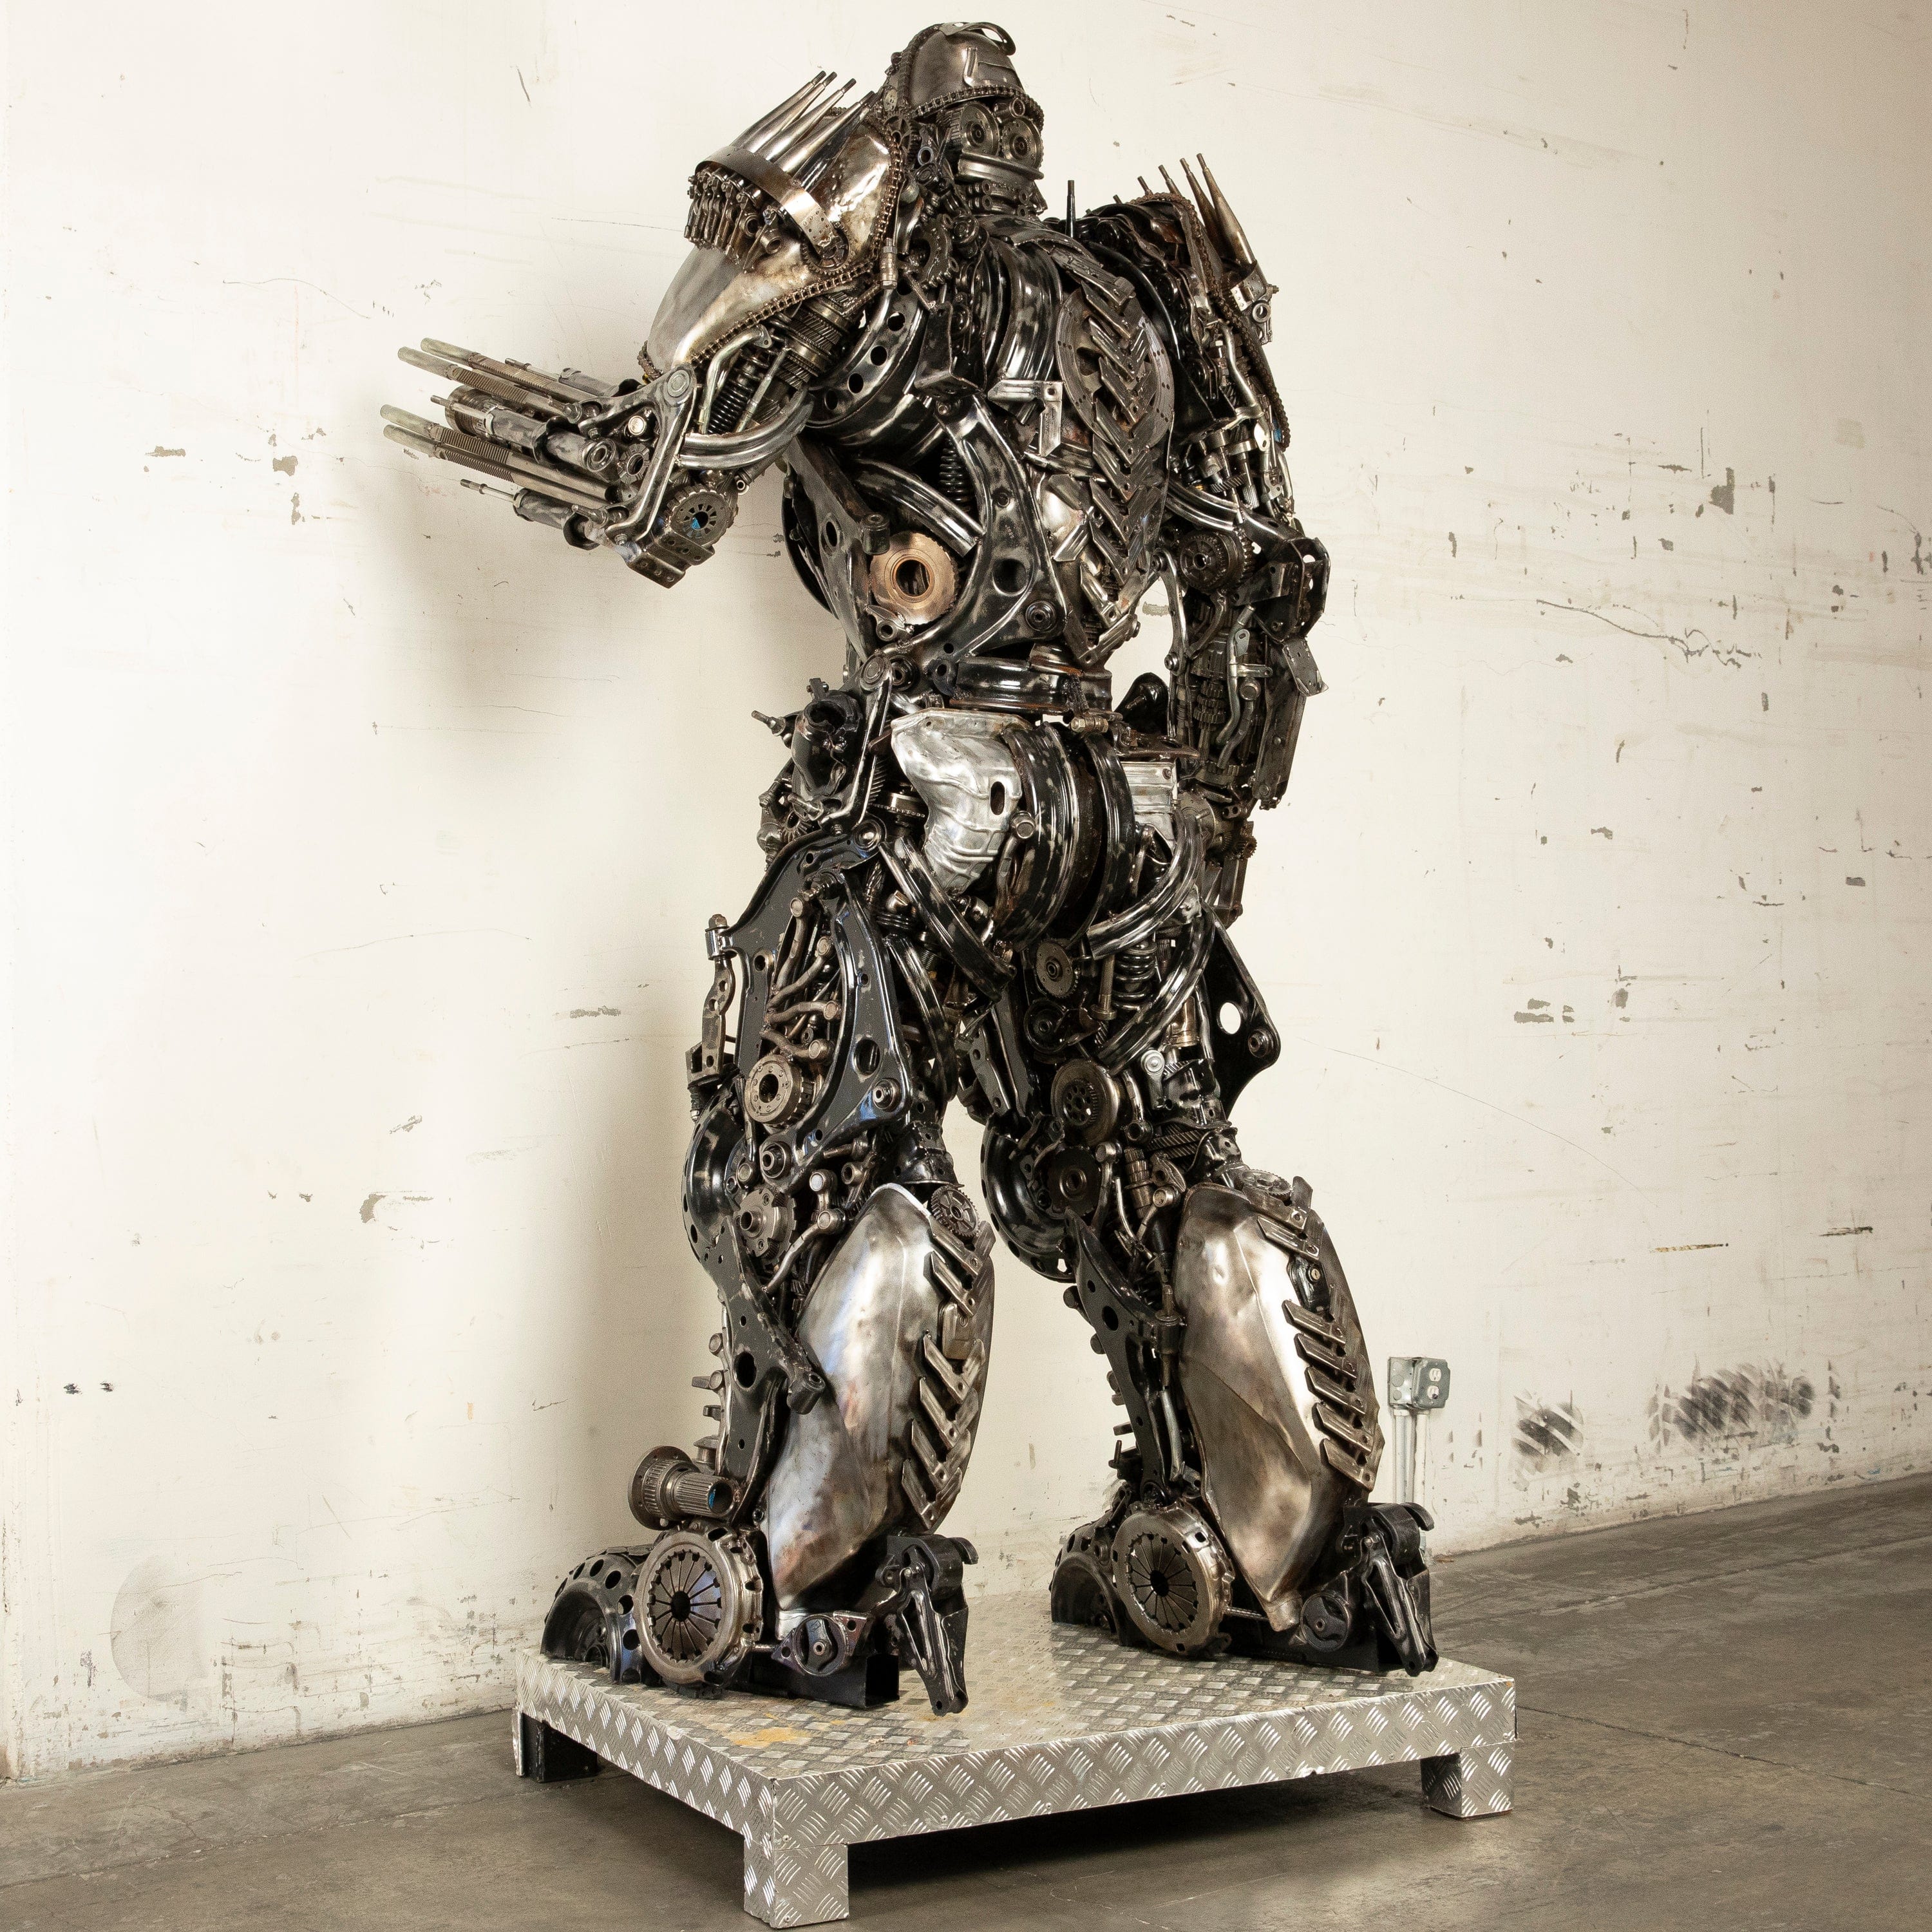 Kalifano Recycled Metal Art 102" Lockdown Decepticon Inspired Recycled Metal Art Sculpture RMS-LD260-S01